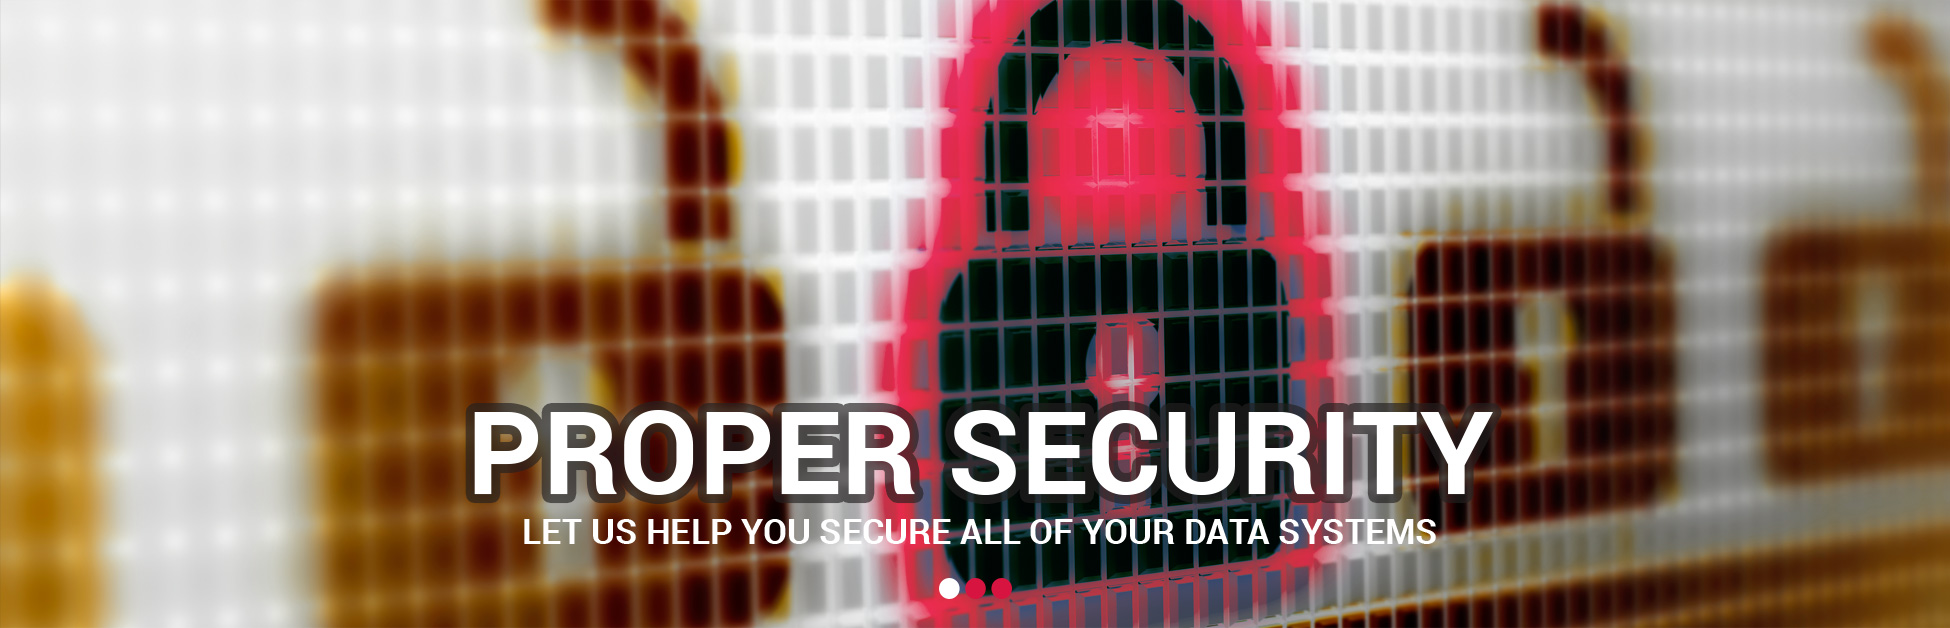 Proper Security - Let us help you secure all of your data systems